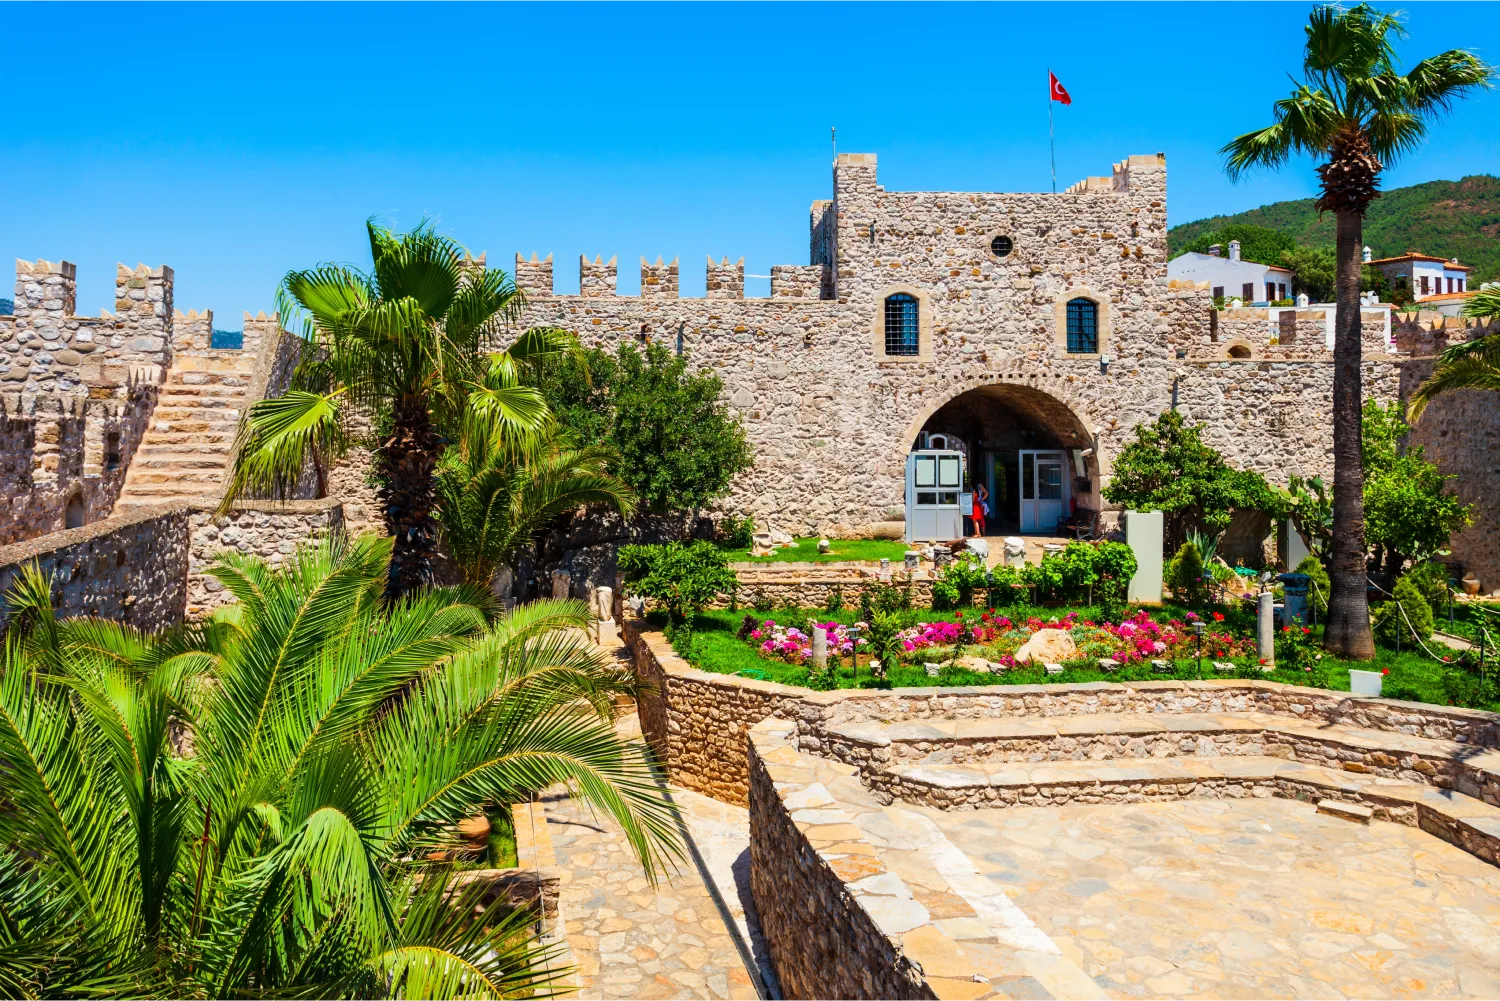 The Castle of Marmaris and its colorful gardens